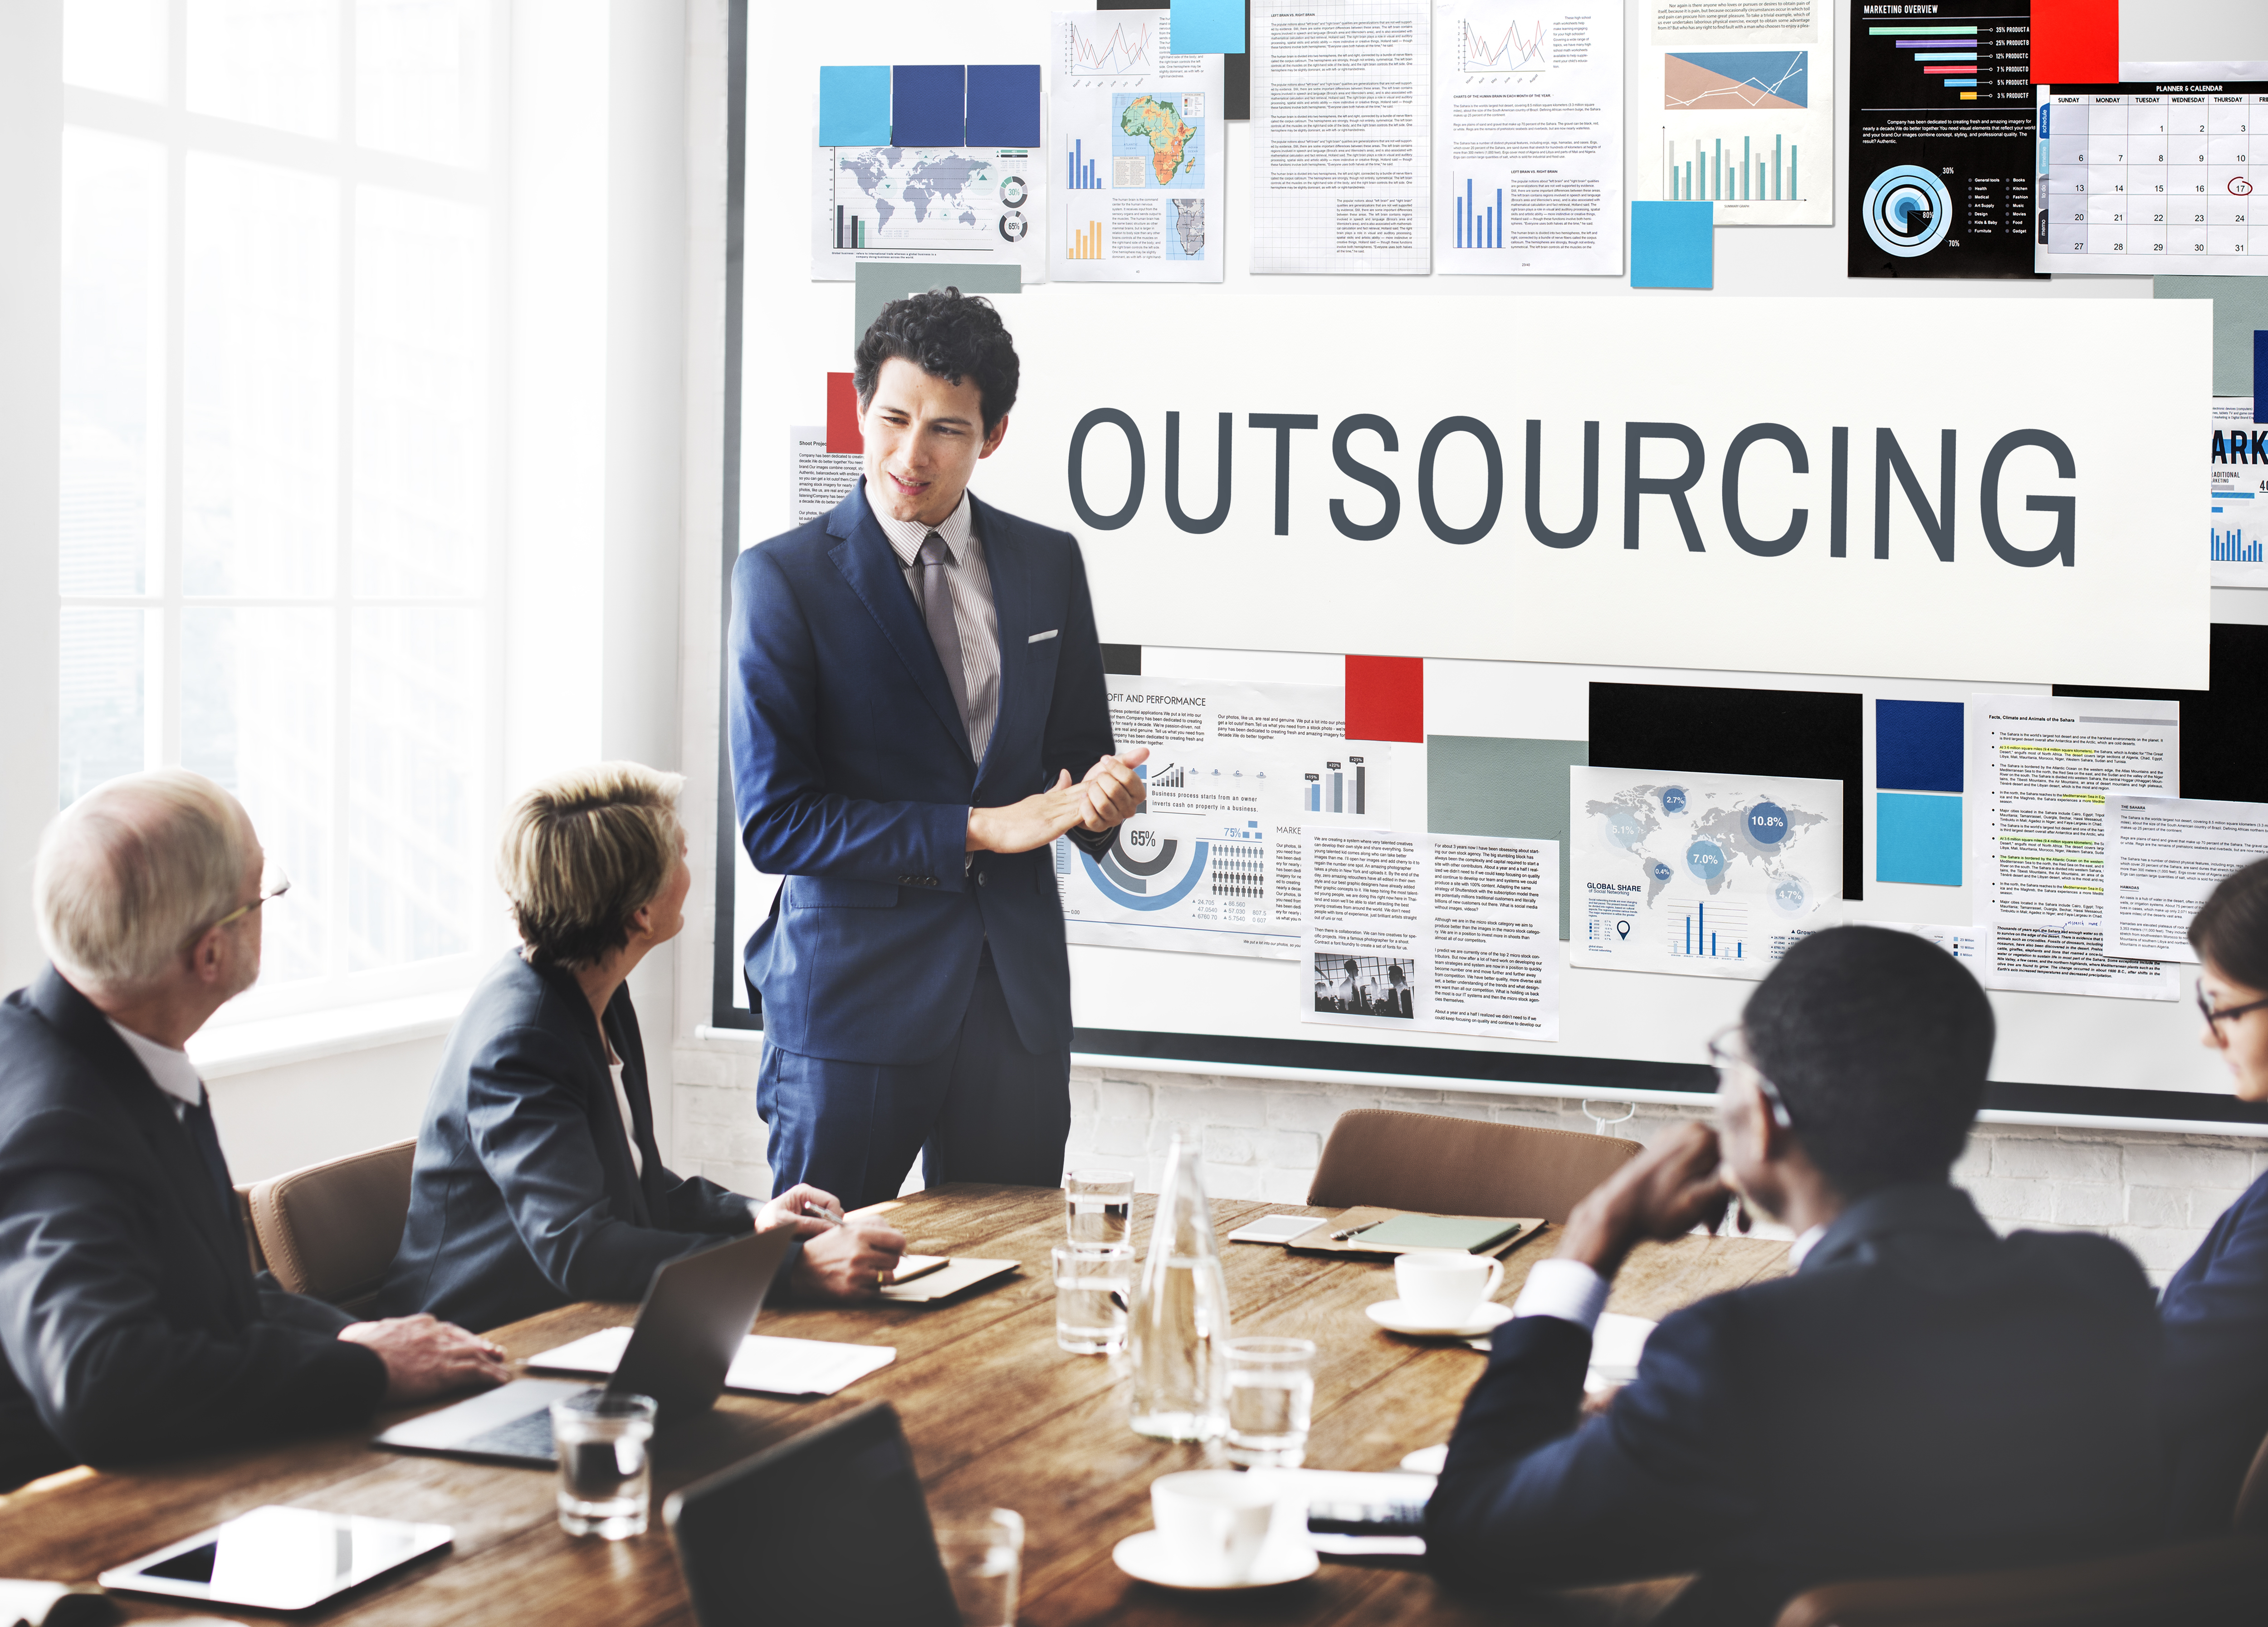 How to Find the Best IT Outsourcing Service for Your Business